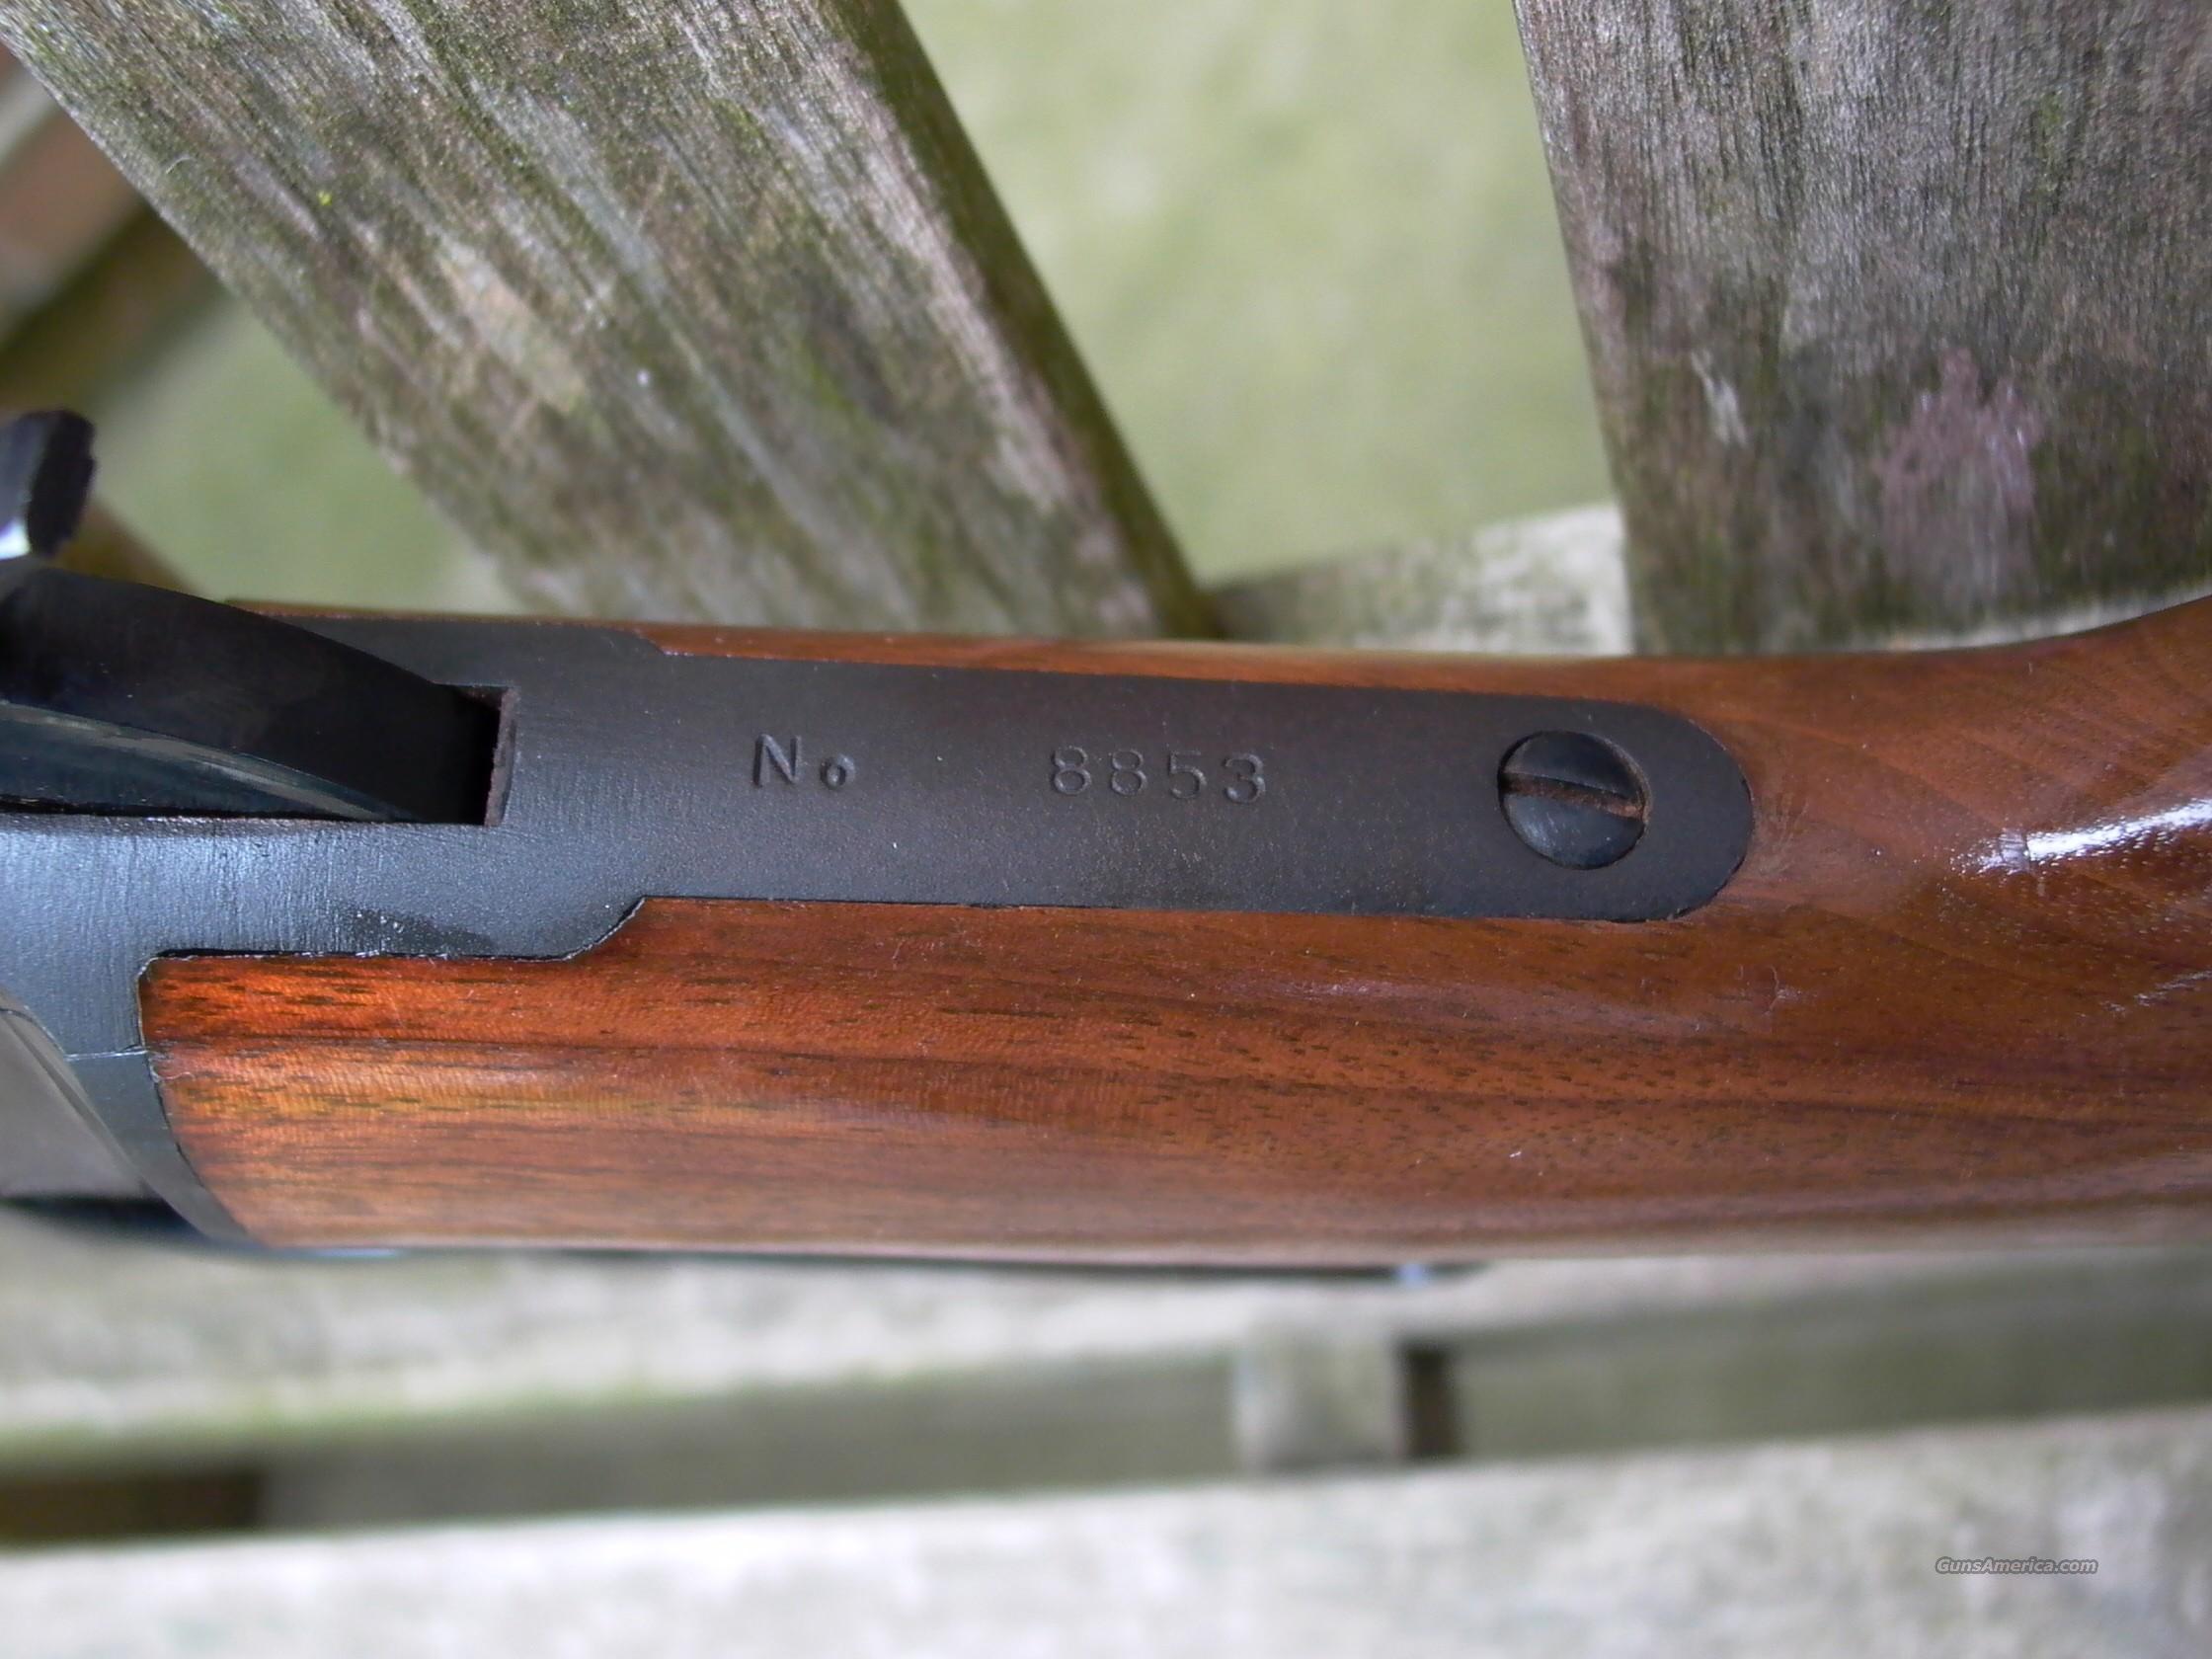 Marlin 39 century limited serial numbers